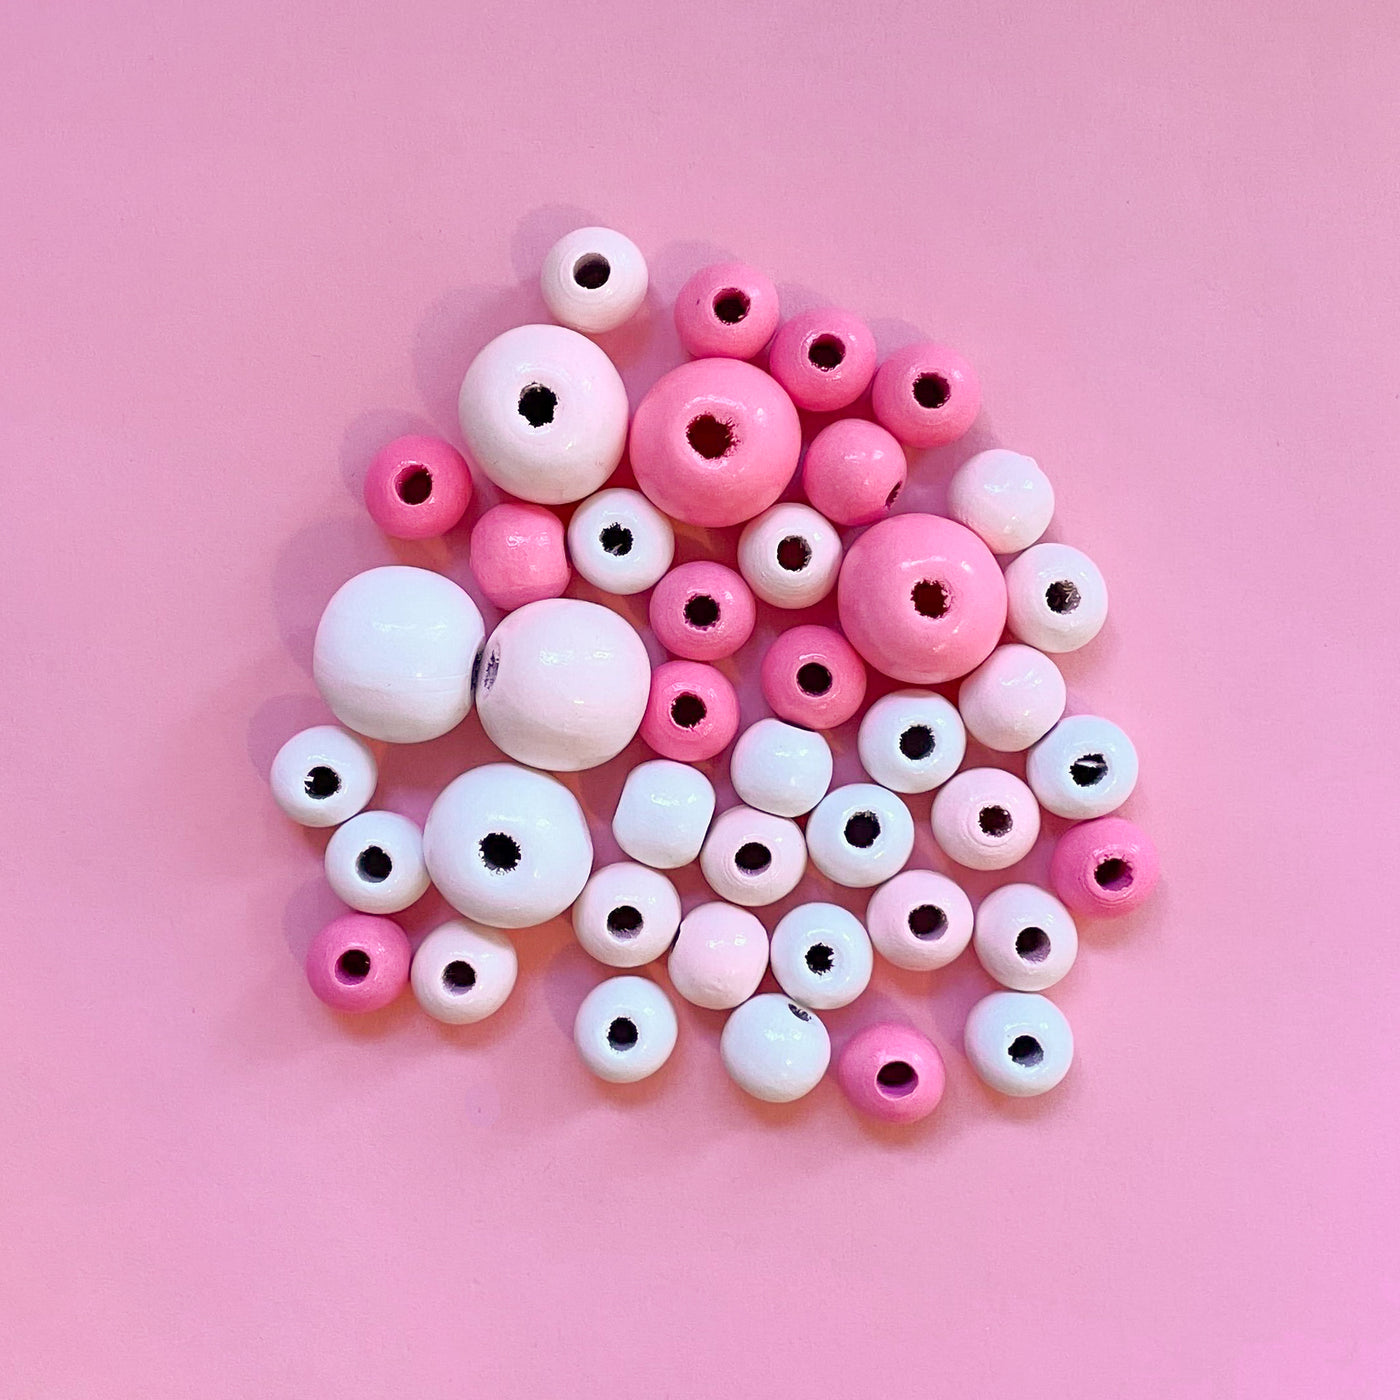 Painted Wood Beads - Pink Medley (42 pieces)